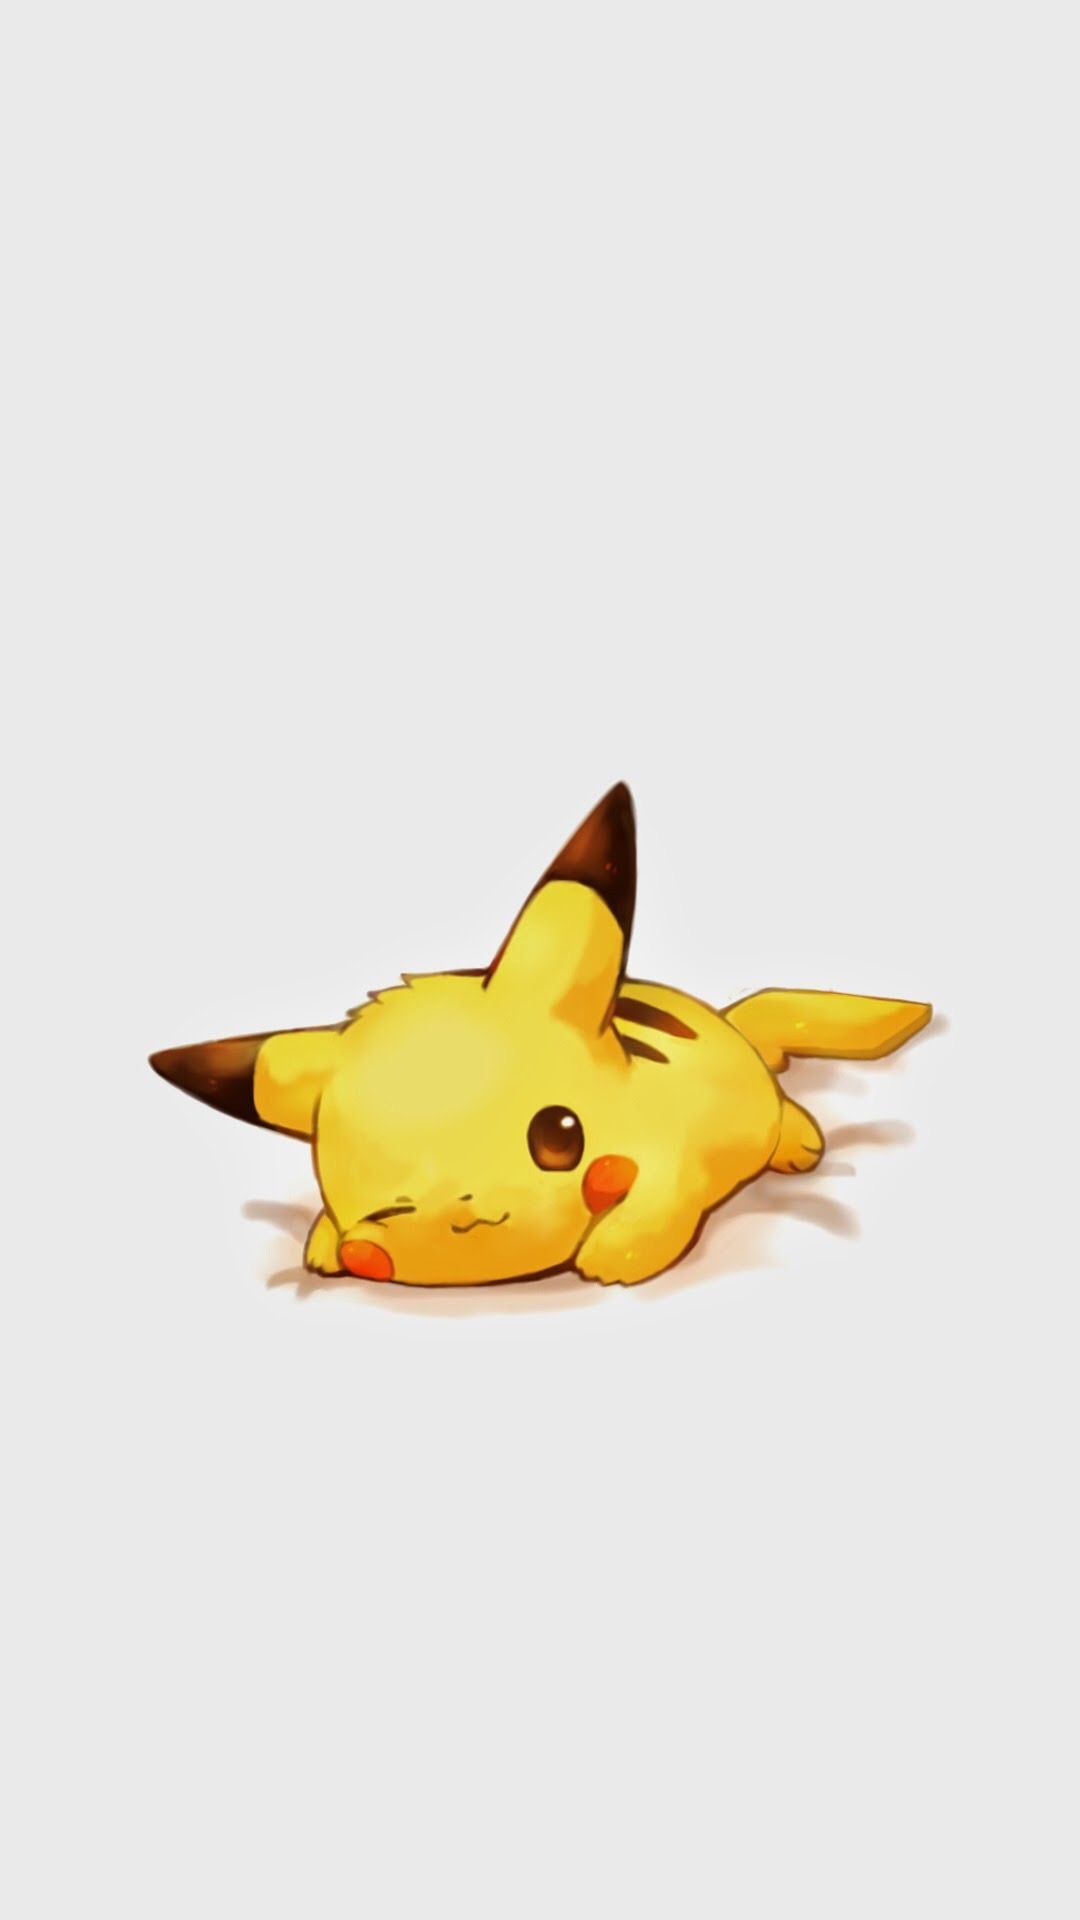 1080x1920 Tap image for more funny cute Pikachu wallpaper! Pikachu - @mobile9 |  Wallpapers for iPhone 5/5s/5c, iPhone 6 & 6 plus #pokemon #anime